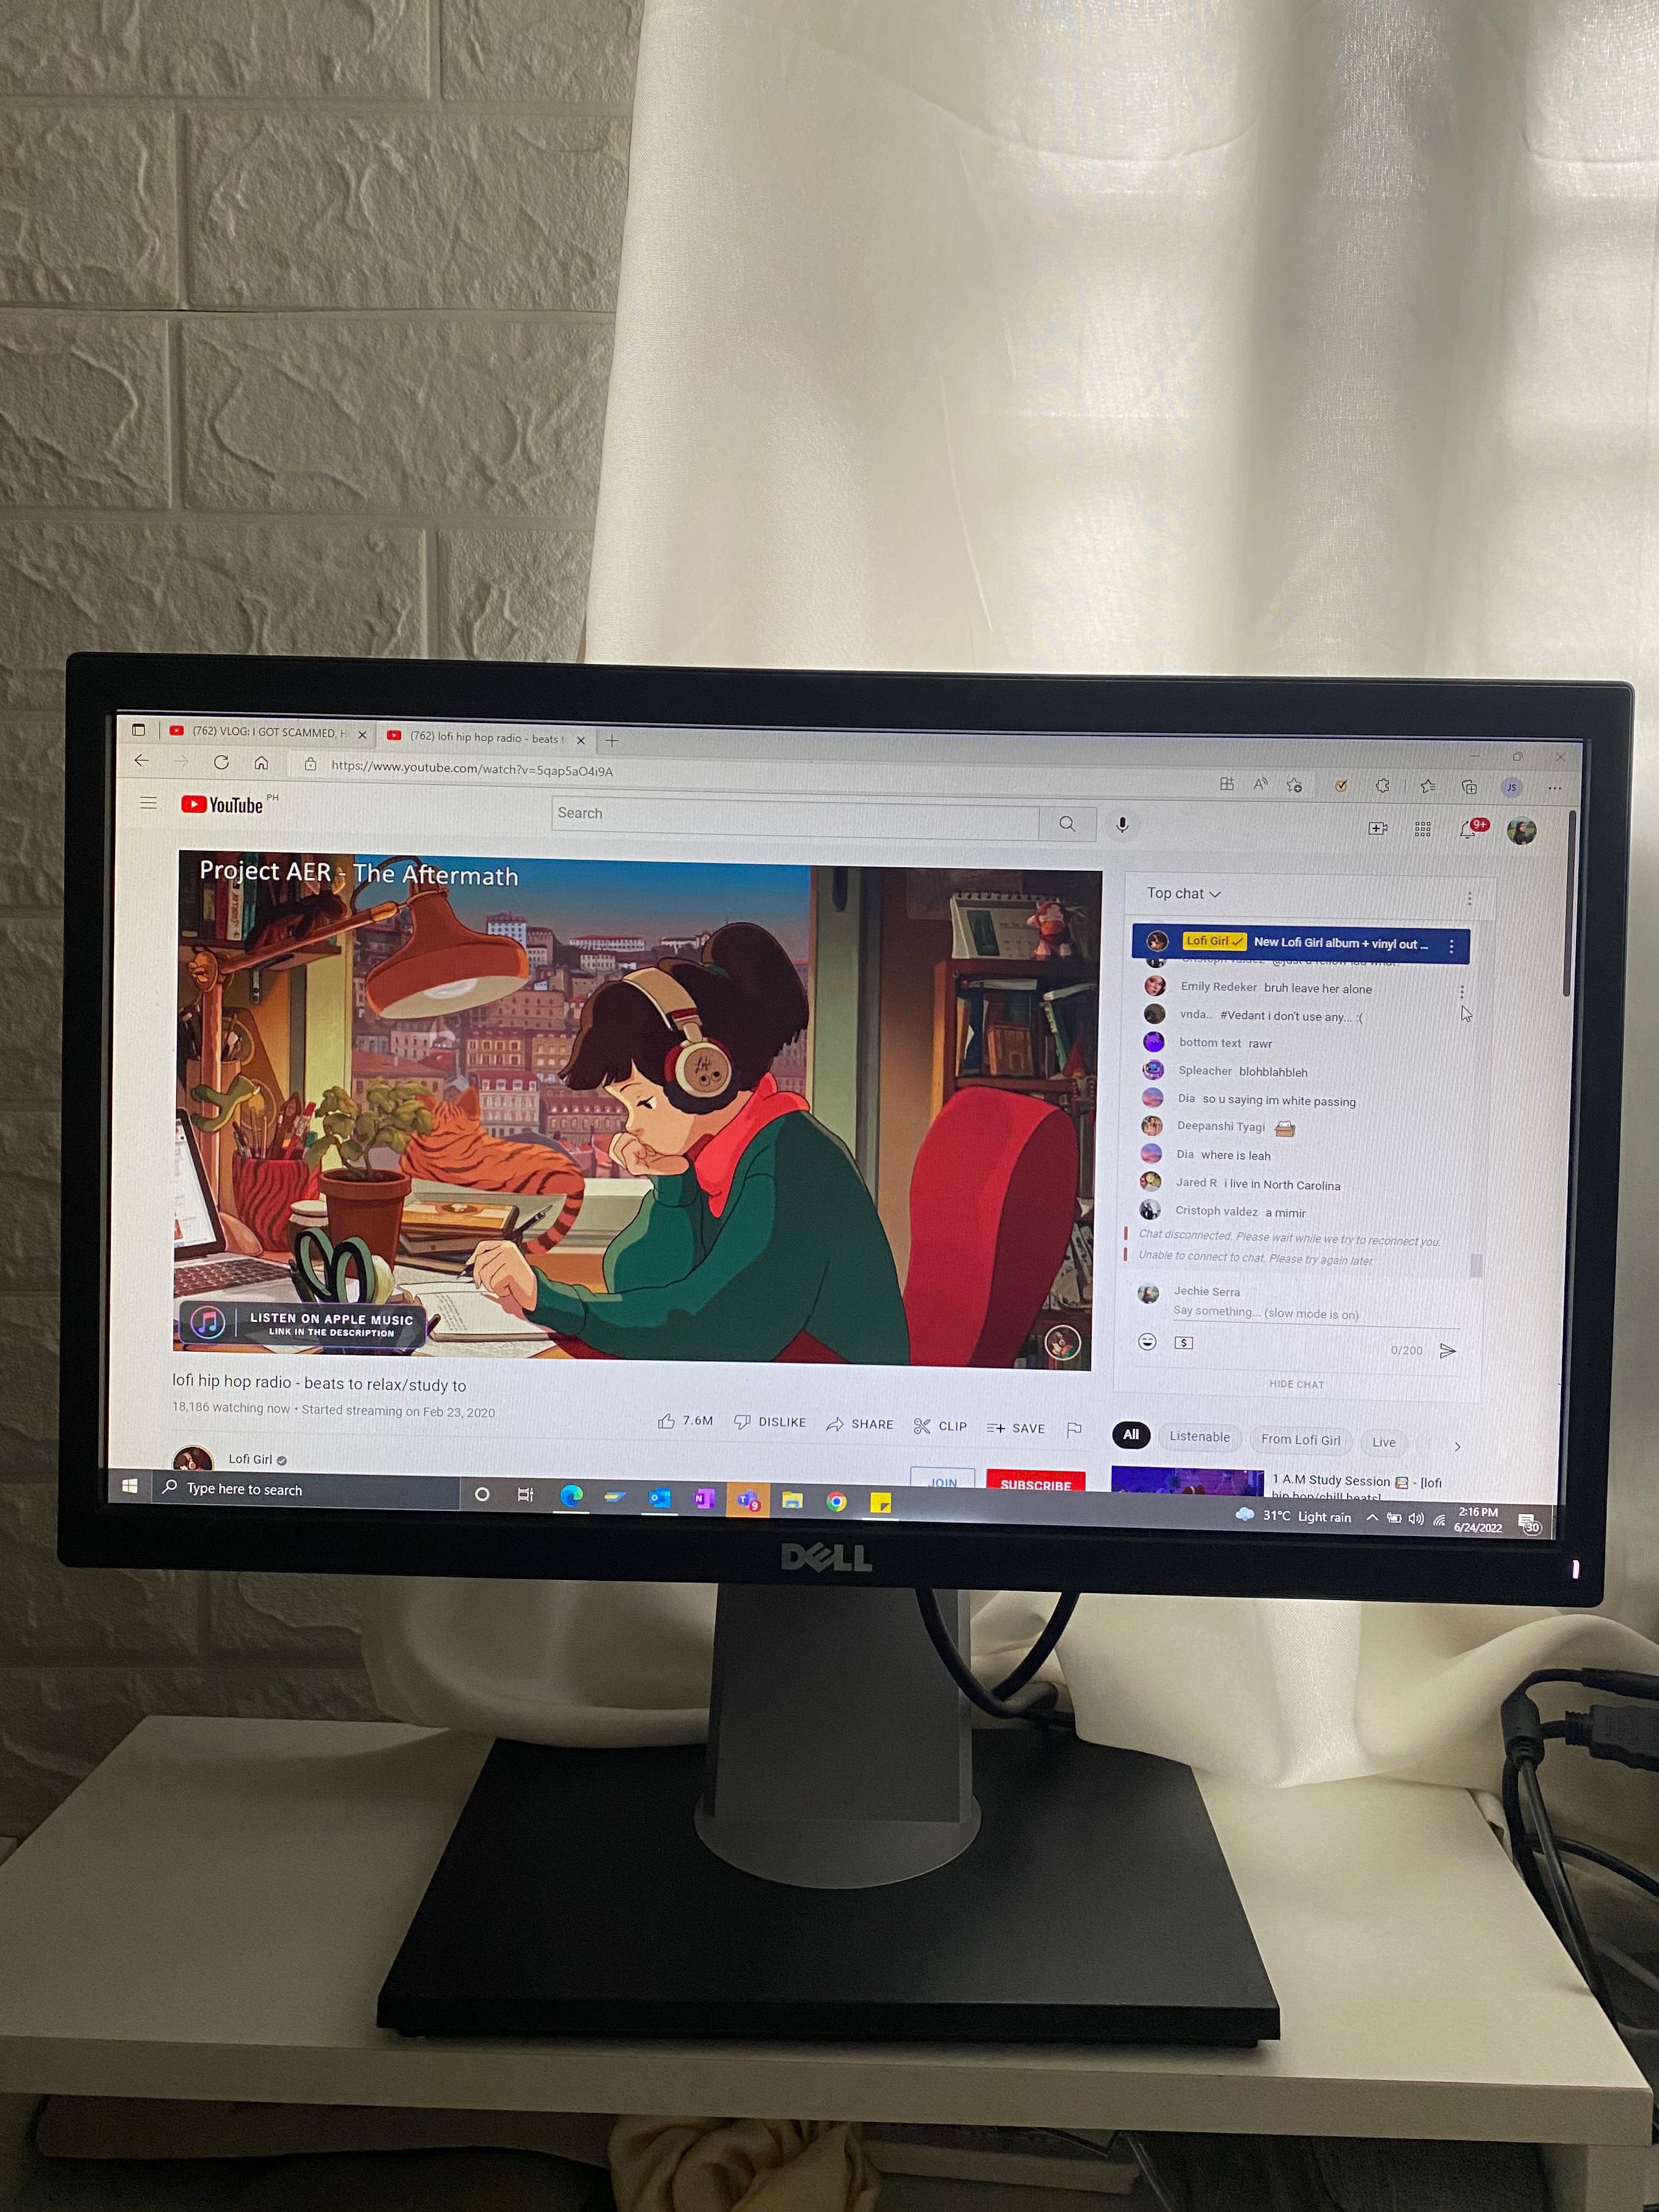 DELL 20” LED Wide Monitor P2018H, Computers & Tech, Desktops on Carousell